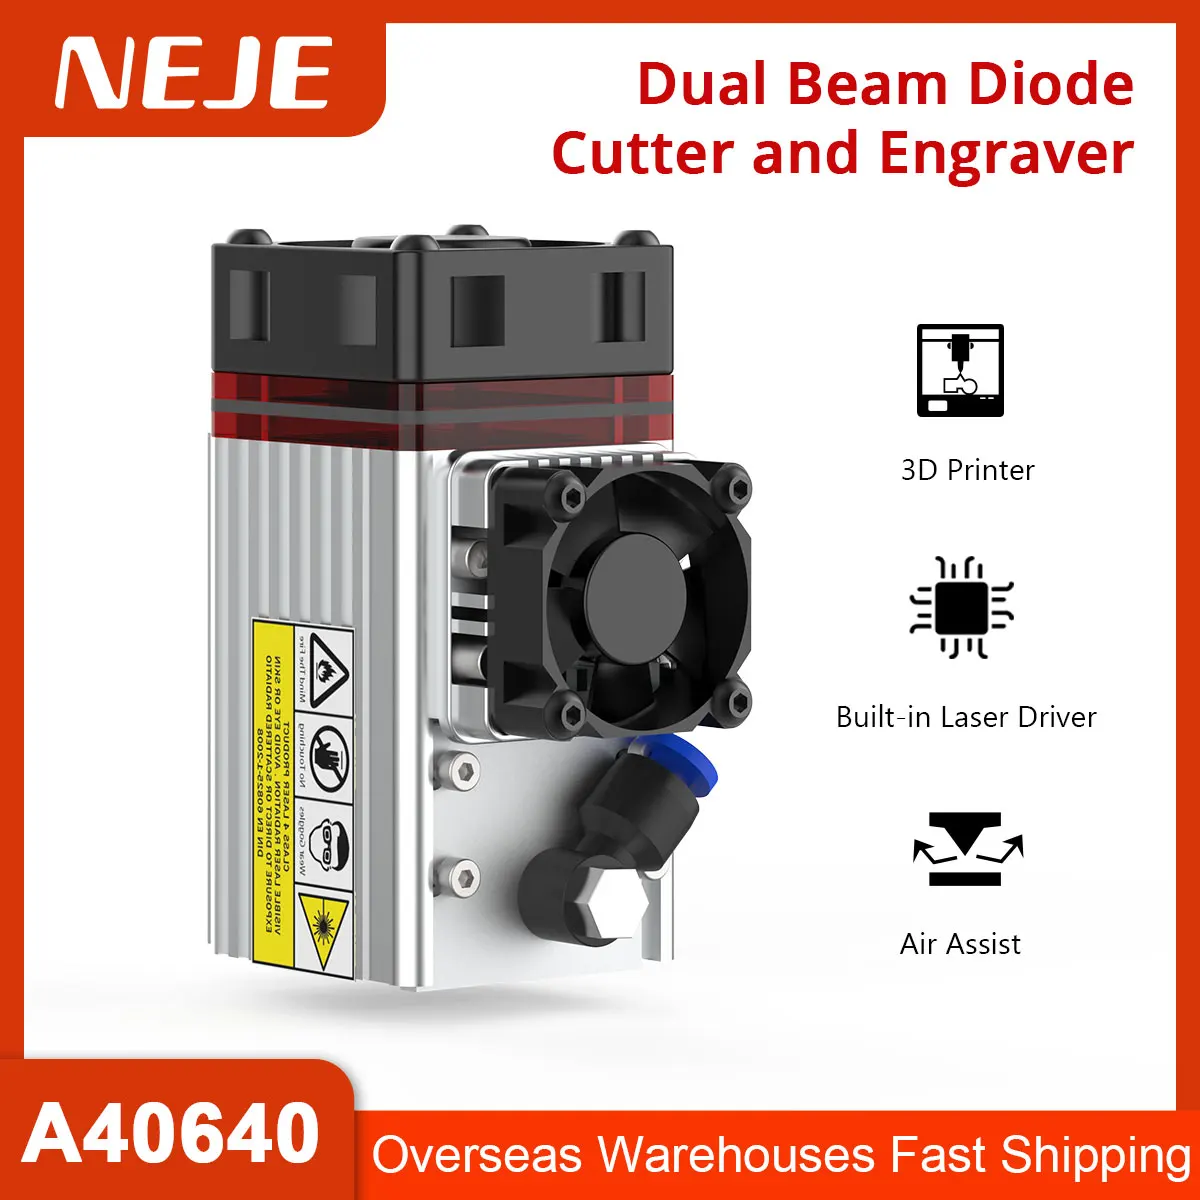 2022 NEJE 3 A40640 Laser Module Metel Nozzle CARVING AND CUTTING - 2 X BEAM - 12W OUTPUT - WIDELY APPLIED enlarge